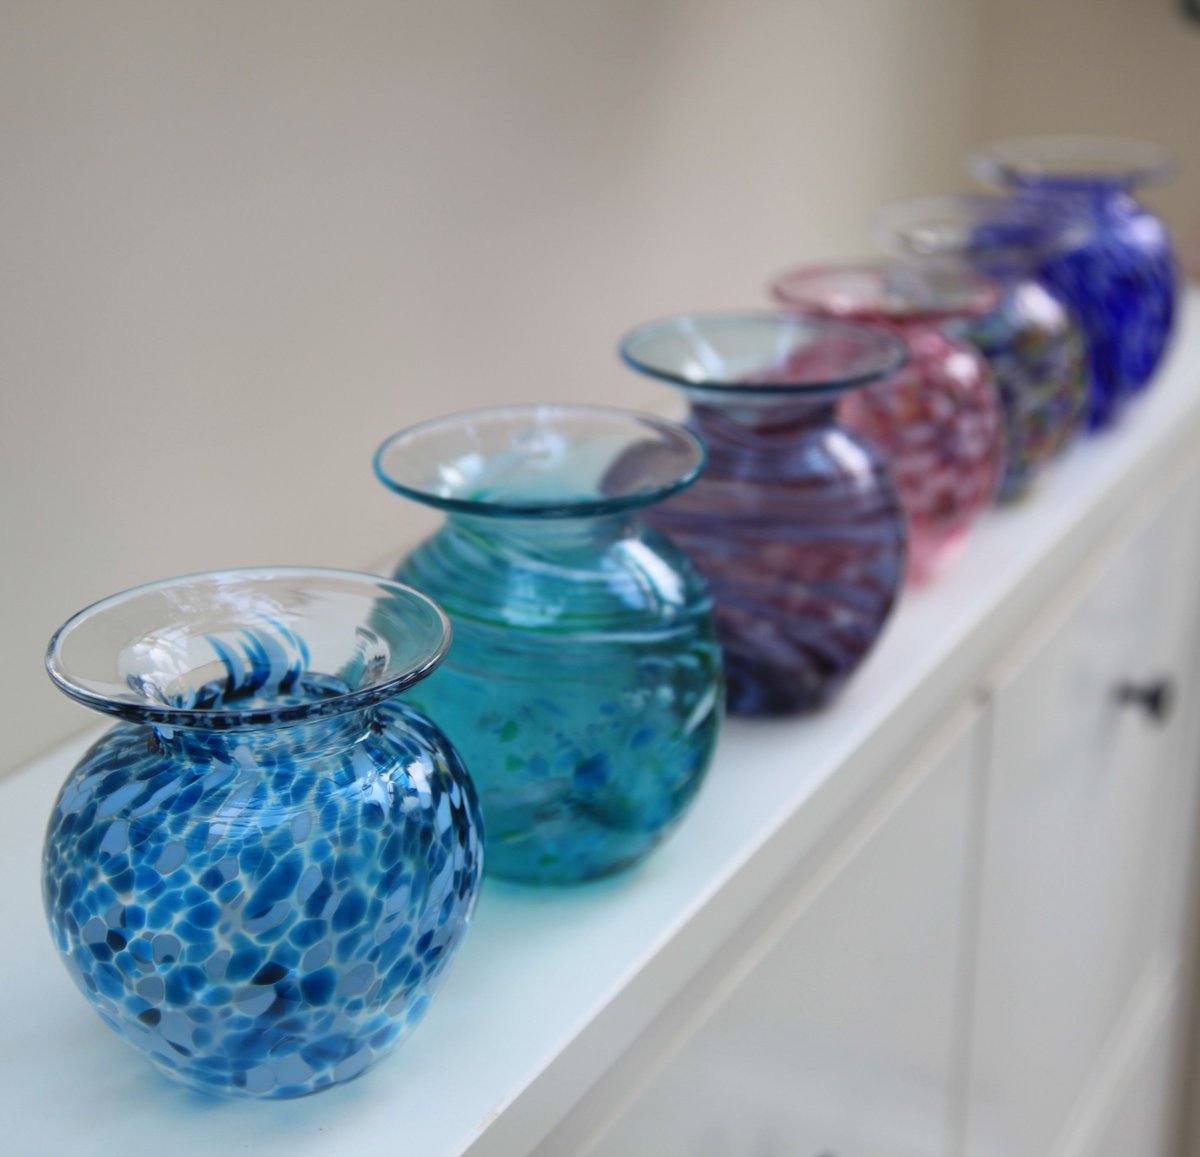 Our stunning Posy Vases come in a range of contemporary colours, styles & sizes. 

Find the perfect addition for your home spaces in our shops or online

l8r.it/pQFZ

#homedecor #bathaquaglass #madeinbath #blownglass #vases #visitbath #bathartisans #summerinbath